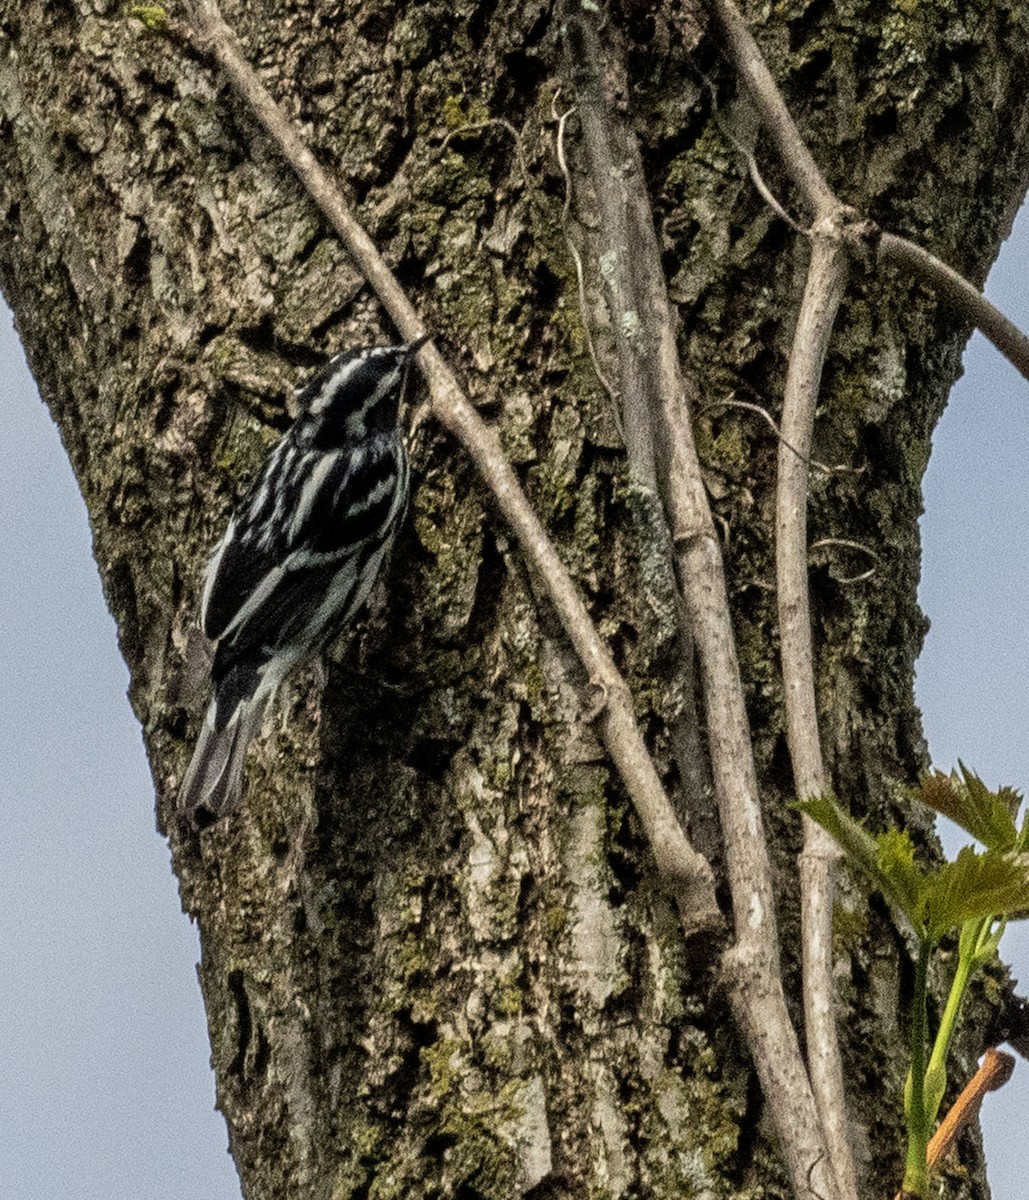 Black-and-white Warbler - Rosemary Kovacs